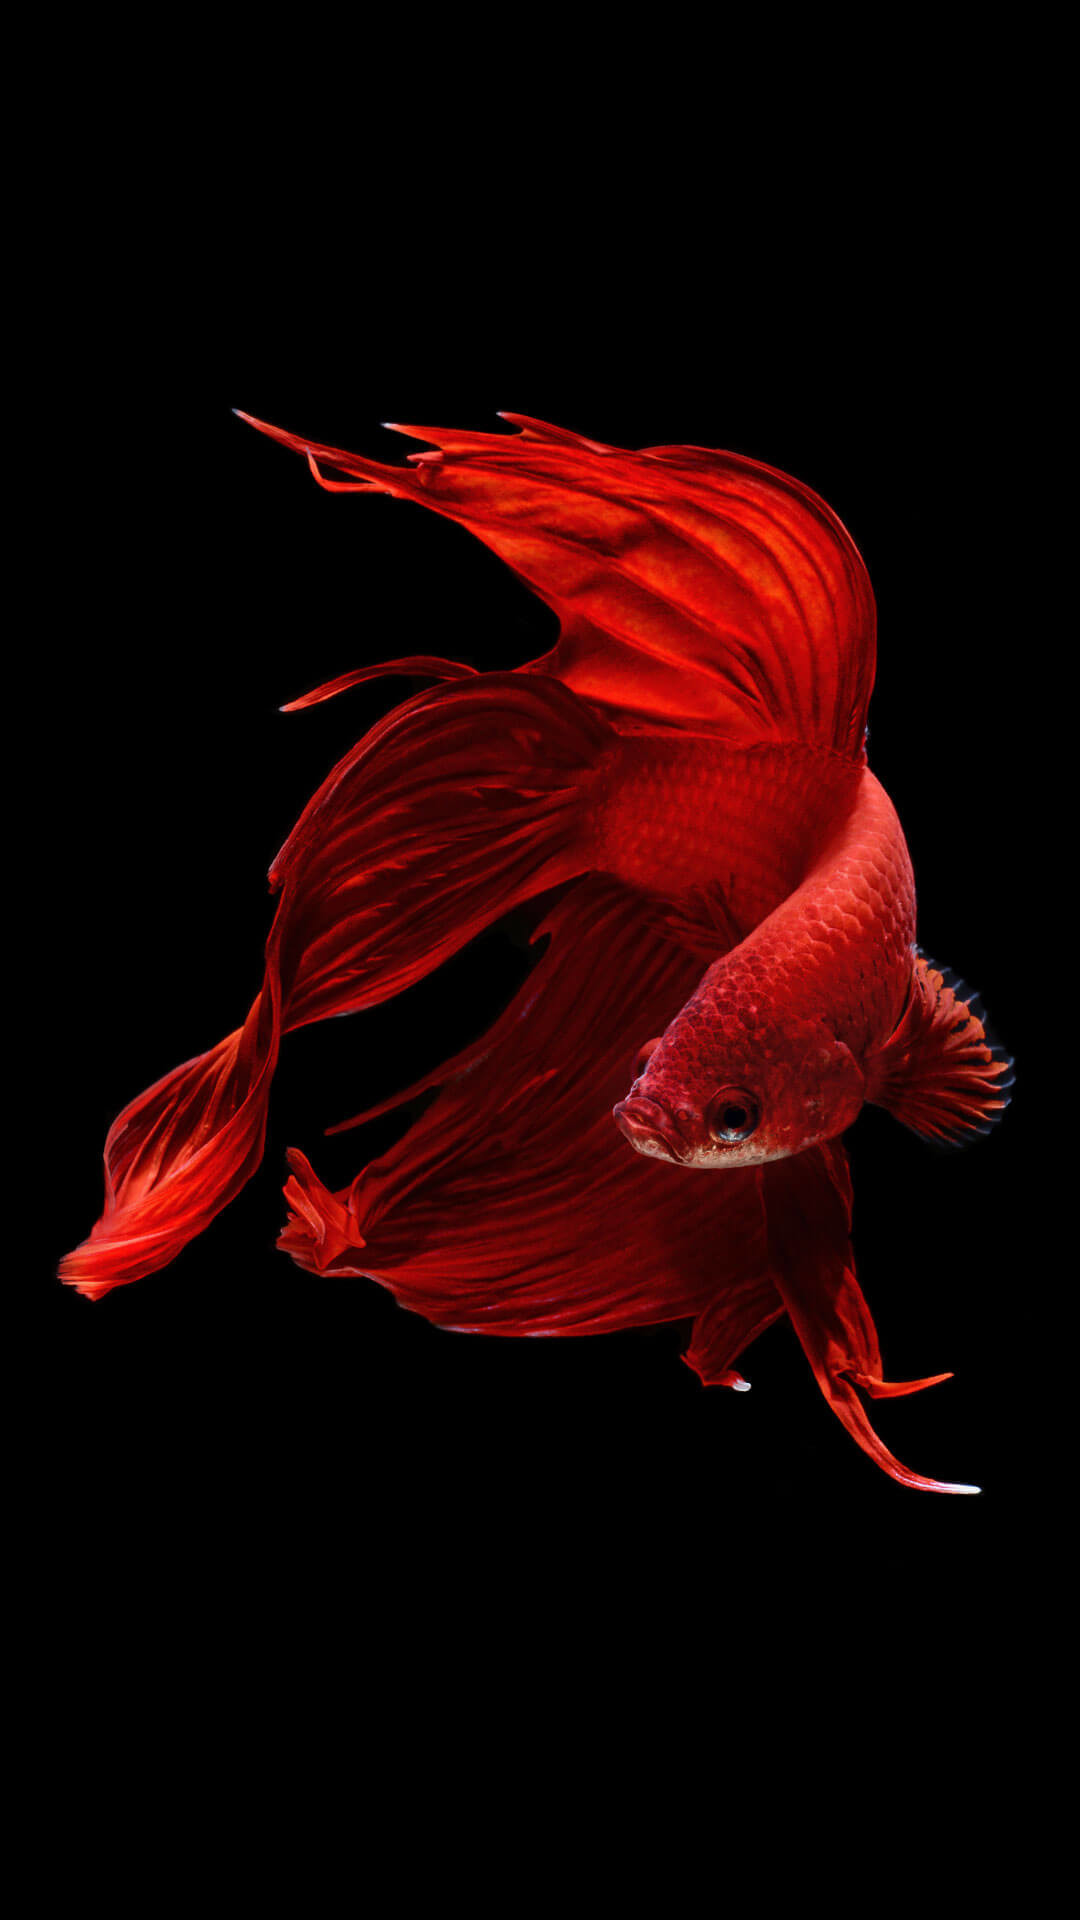 Betta Fish Iphone 6 And Iphone 6s Wallpaper Hd 
 Data - Iphone Fish Wallpaper Hd - HD Wallpaper 